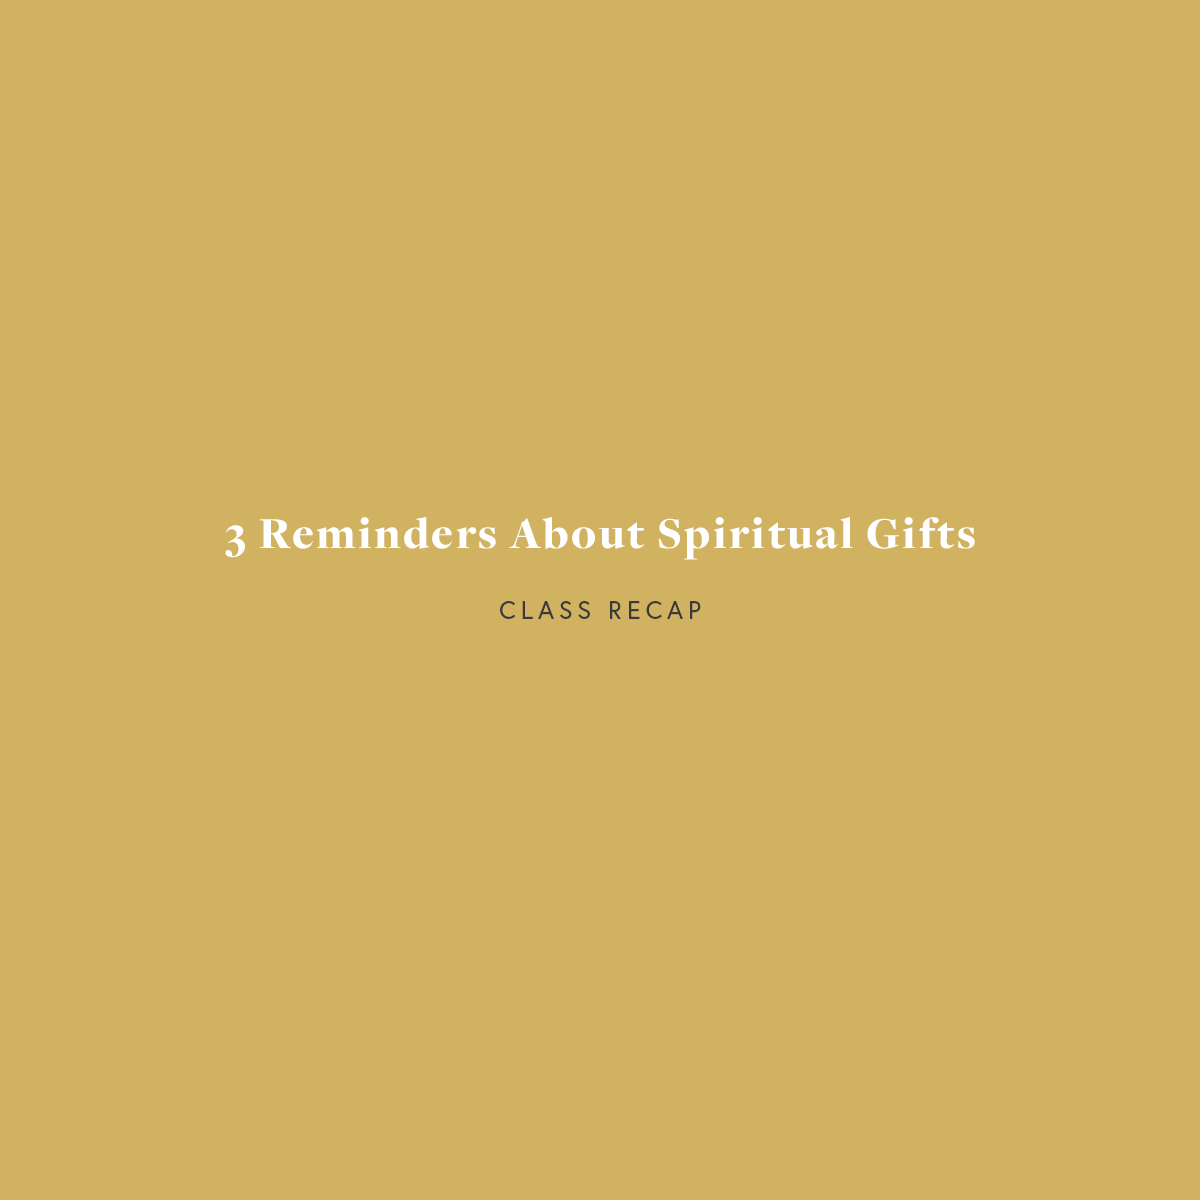 3 Reminders about Spiritual Gifts